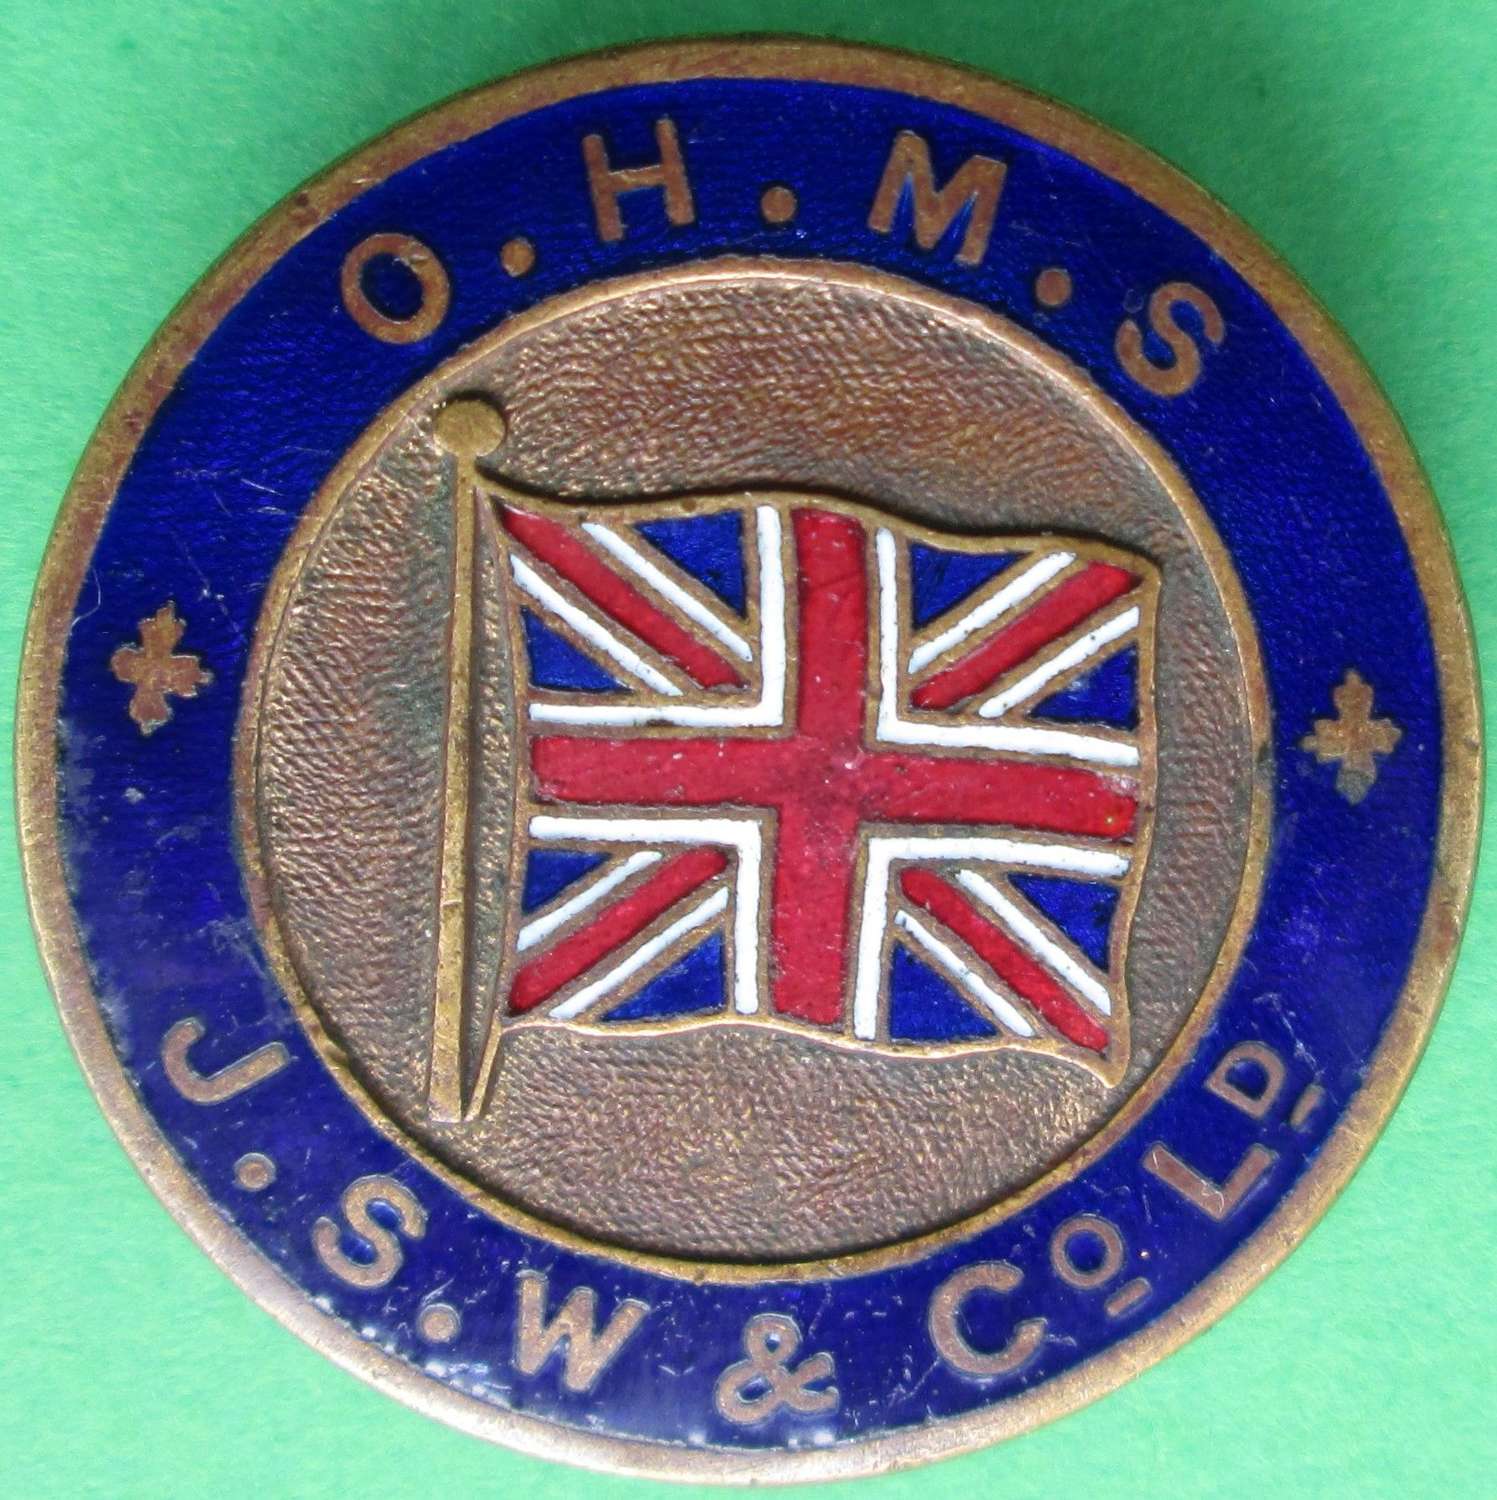 'ON HIS MAJESTY'S SERVICE' WAR SERVICE LAPEL BADGE